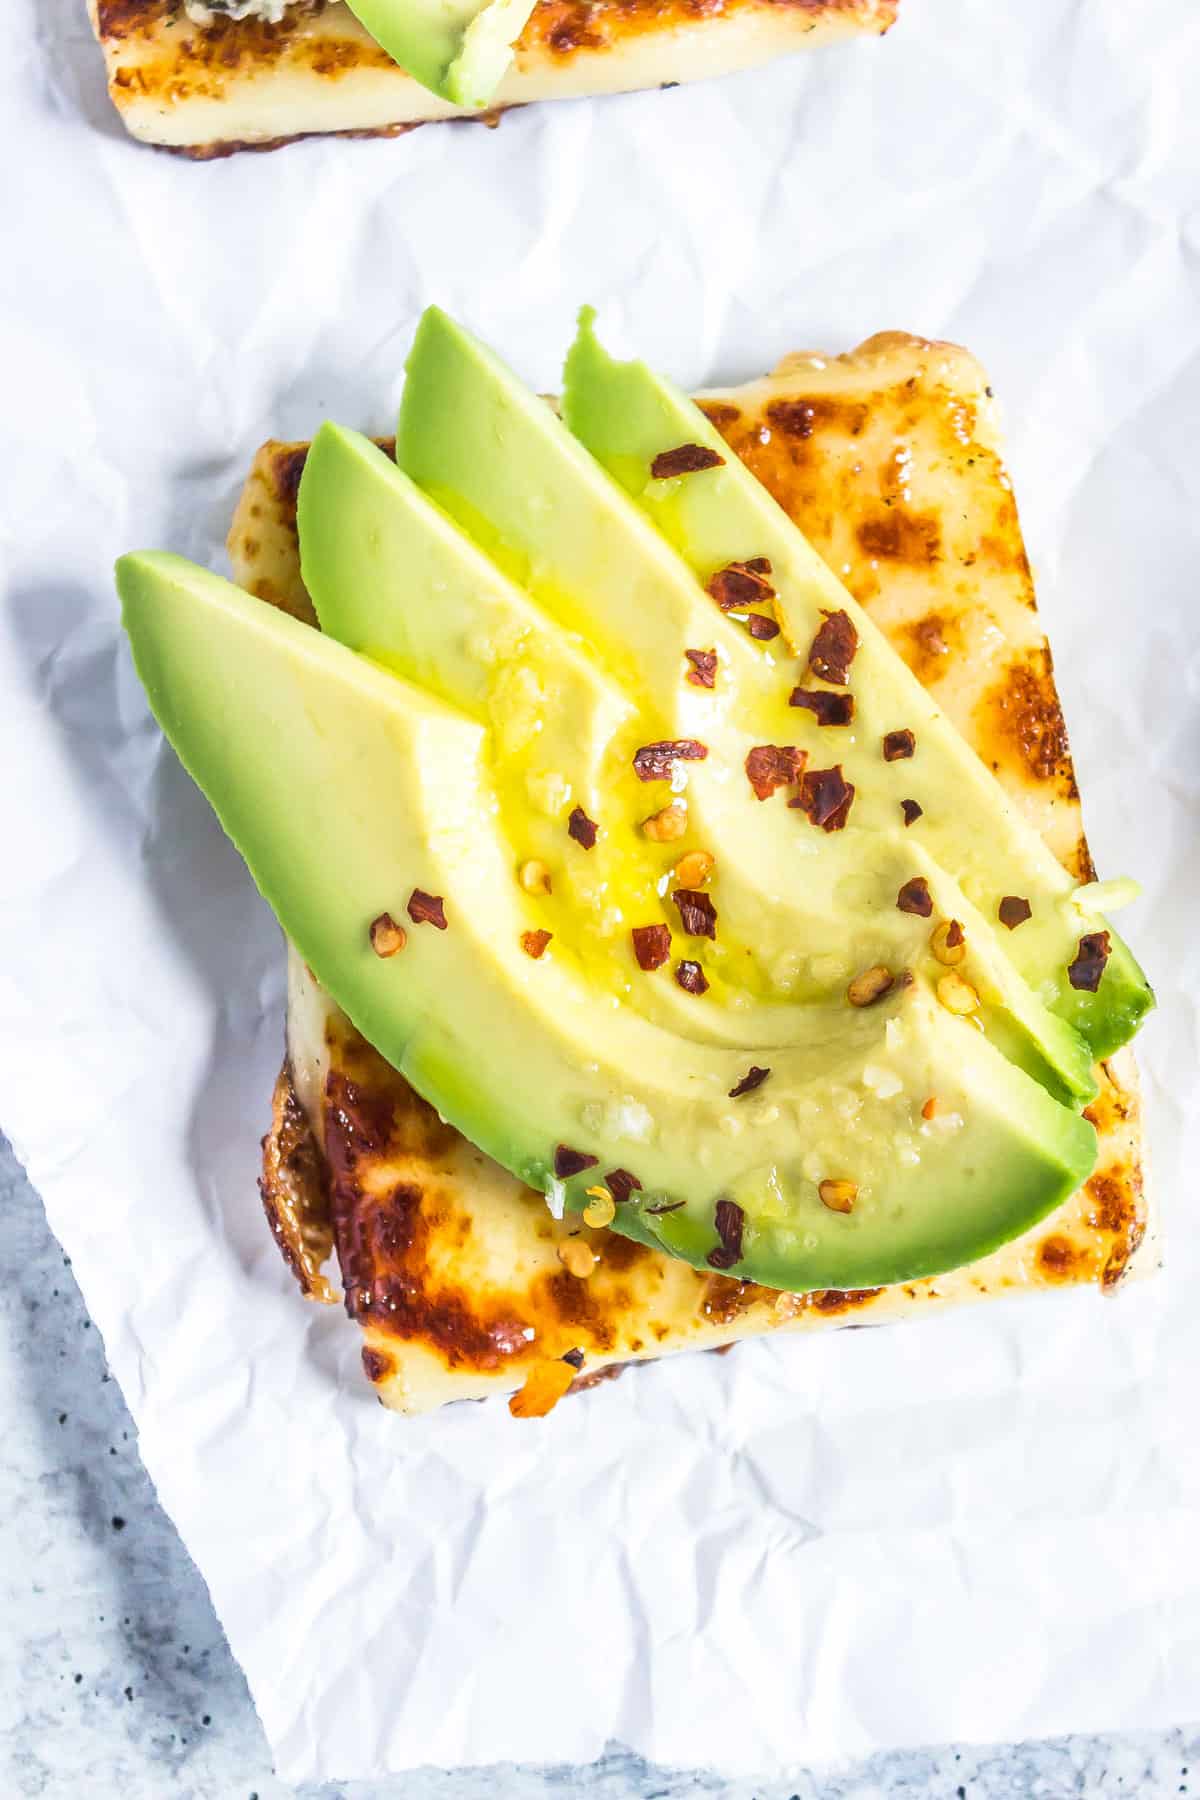 simple avocado, salt, and red pepper flakes on bread cheese